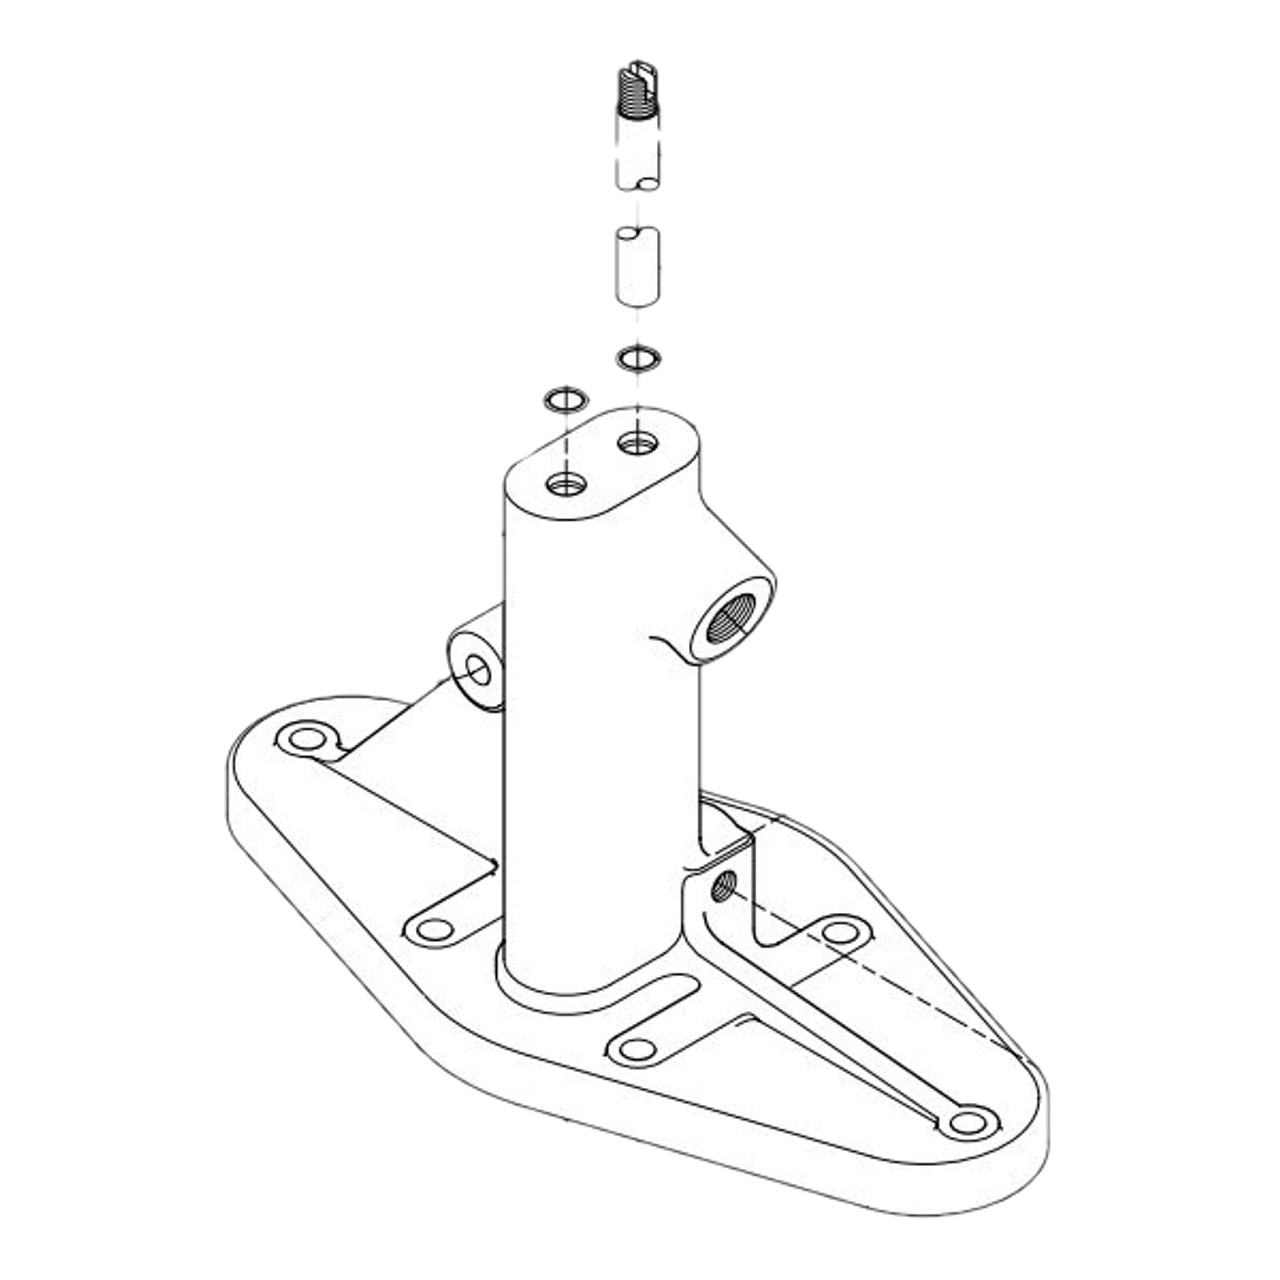 Body and Plunger Assembly Image